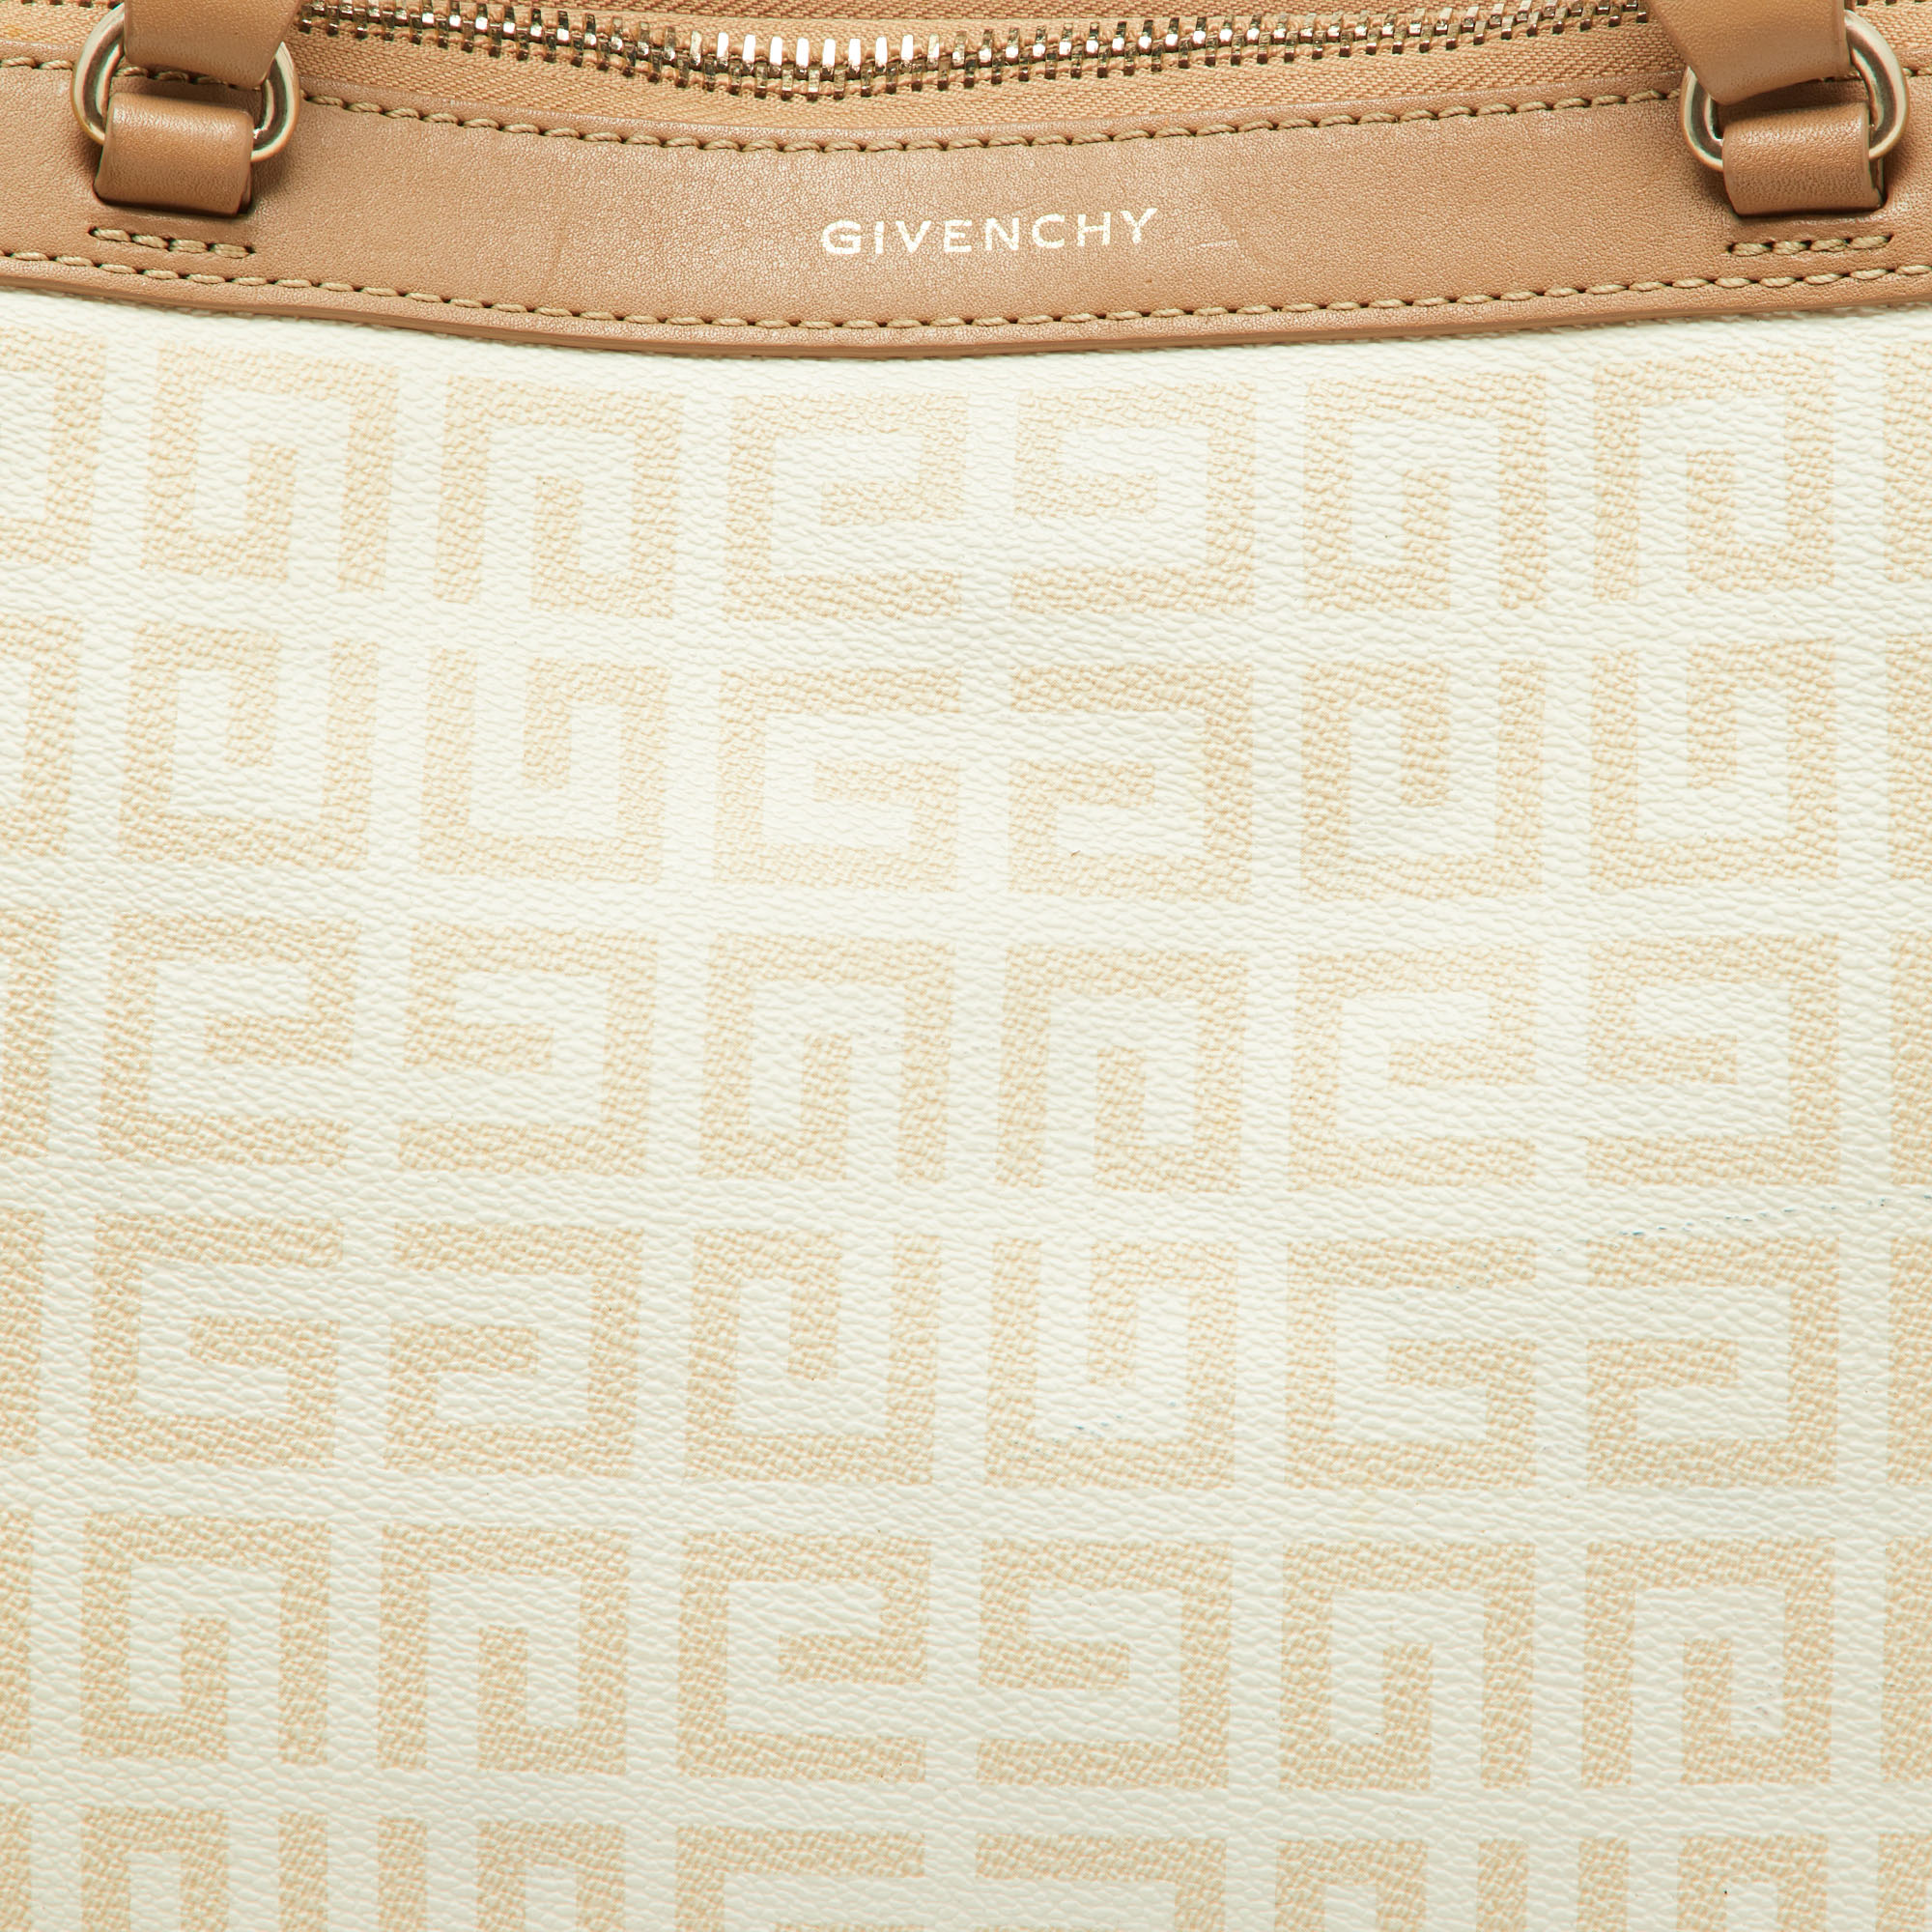 Givenchy Beige/Cream Monogram Coated Canvas And Leather Double Zip Tote